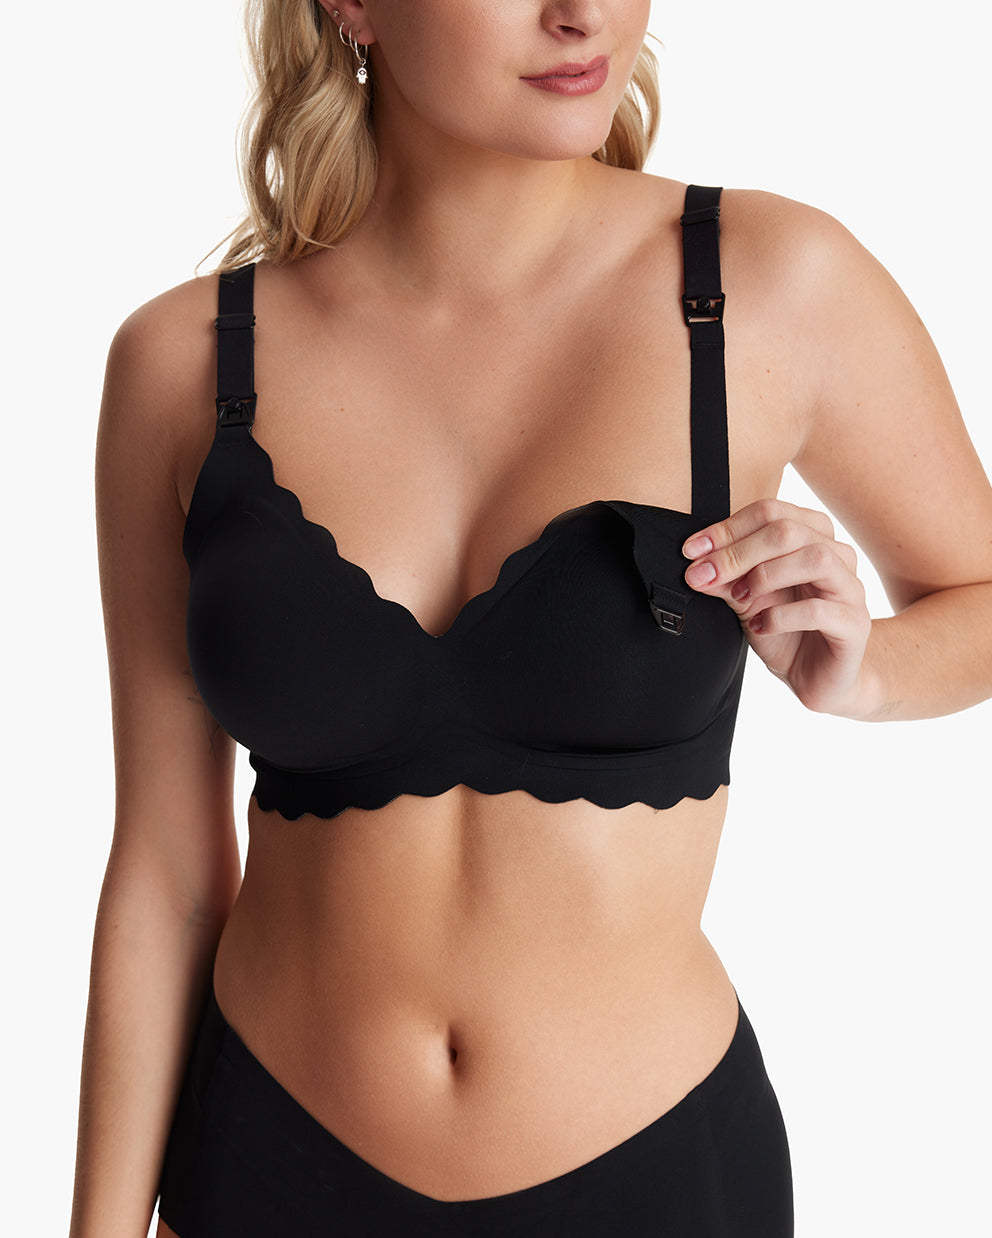 The Essentials: Our Jelly Gel + SMOOTH + Supermom Bra Bundle with One-Hand Clips